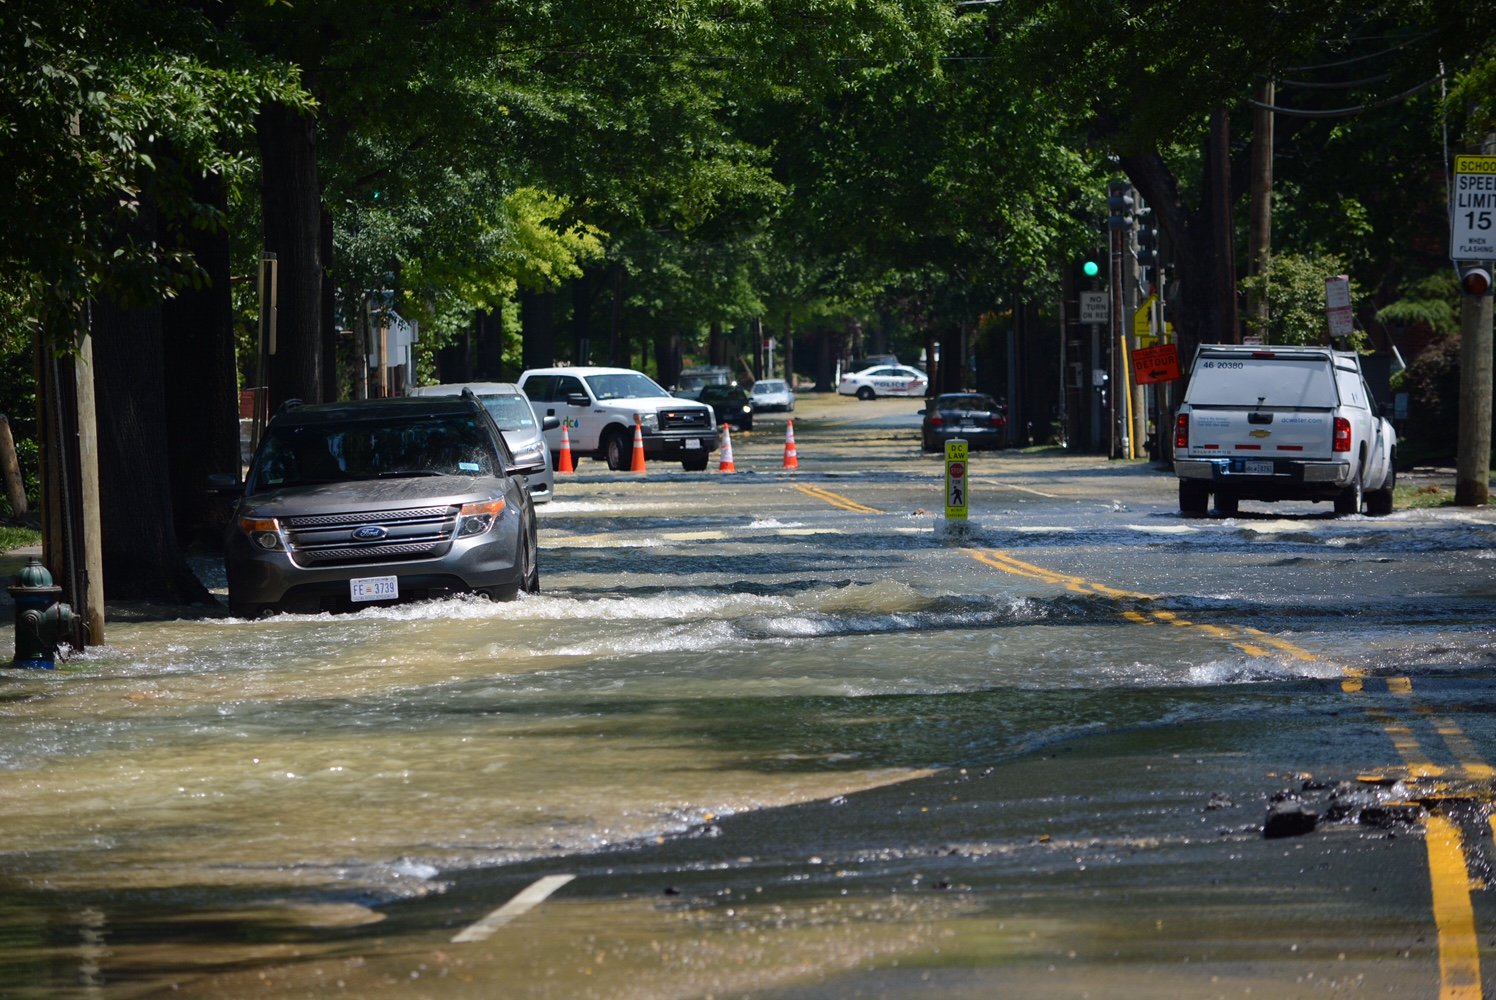 Water gushes from a broken water main on MacArthur Boulevard. (WTOP/Dave Dildine)